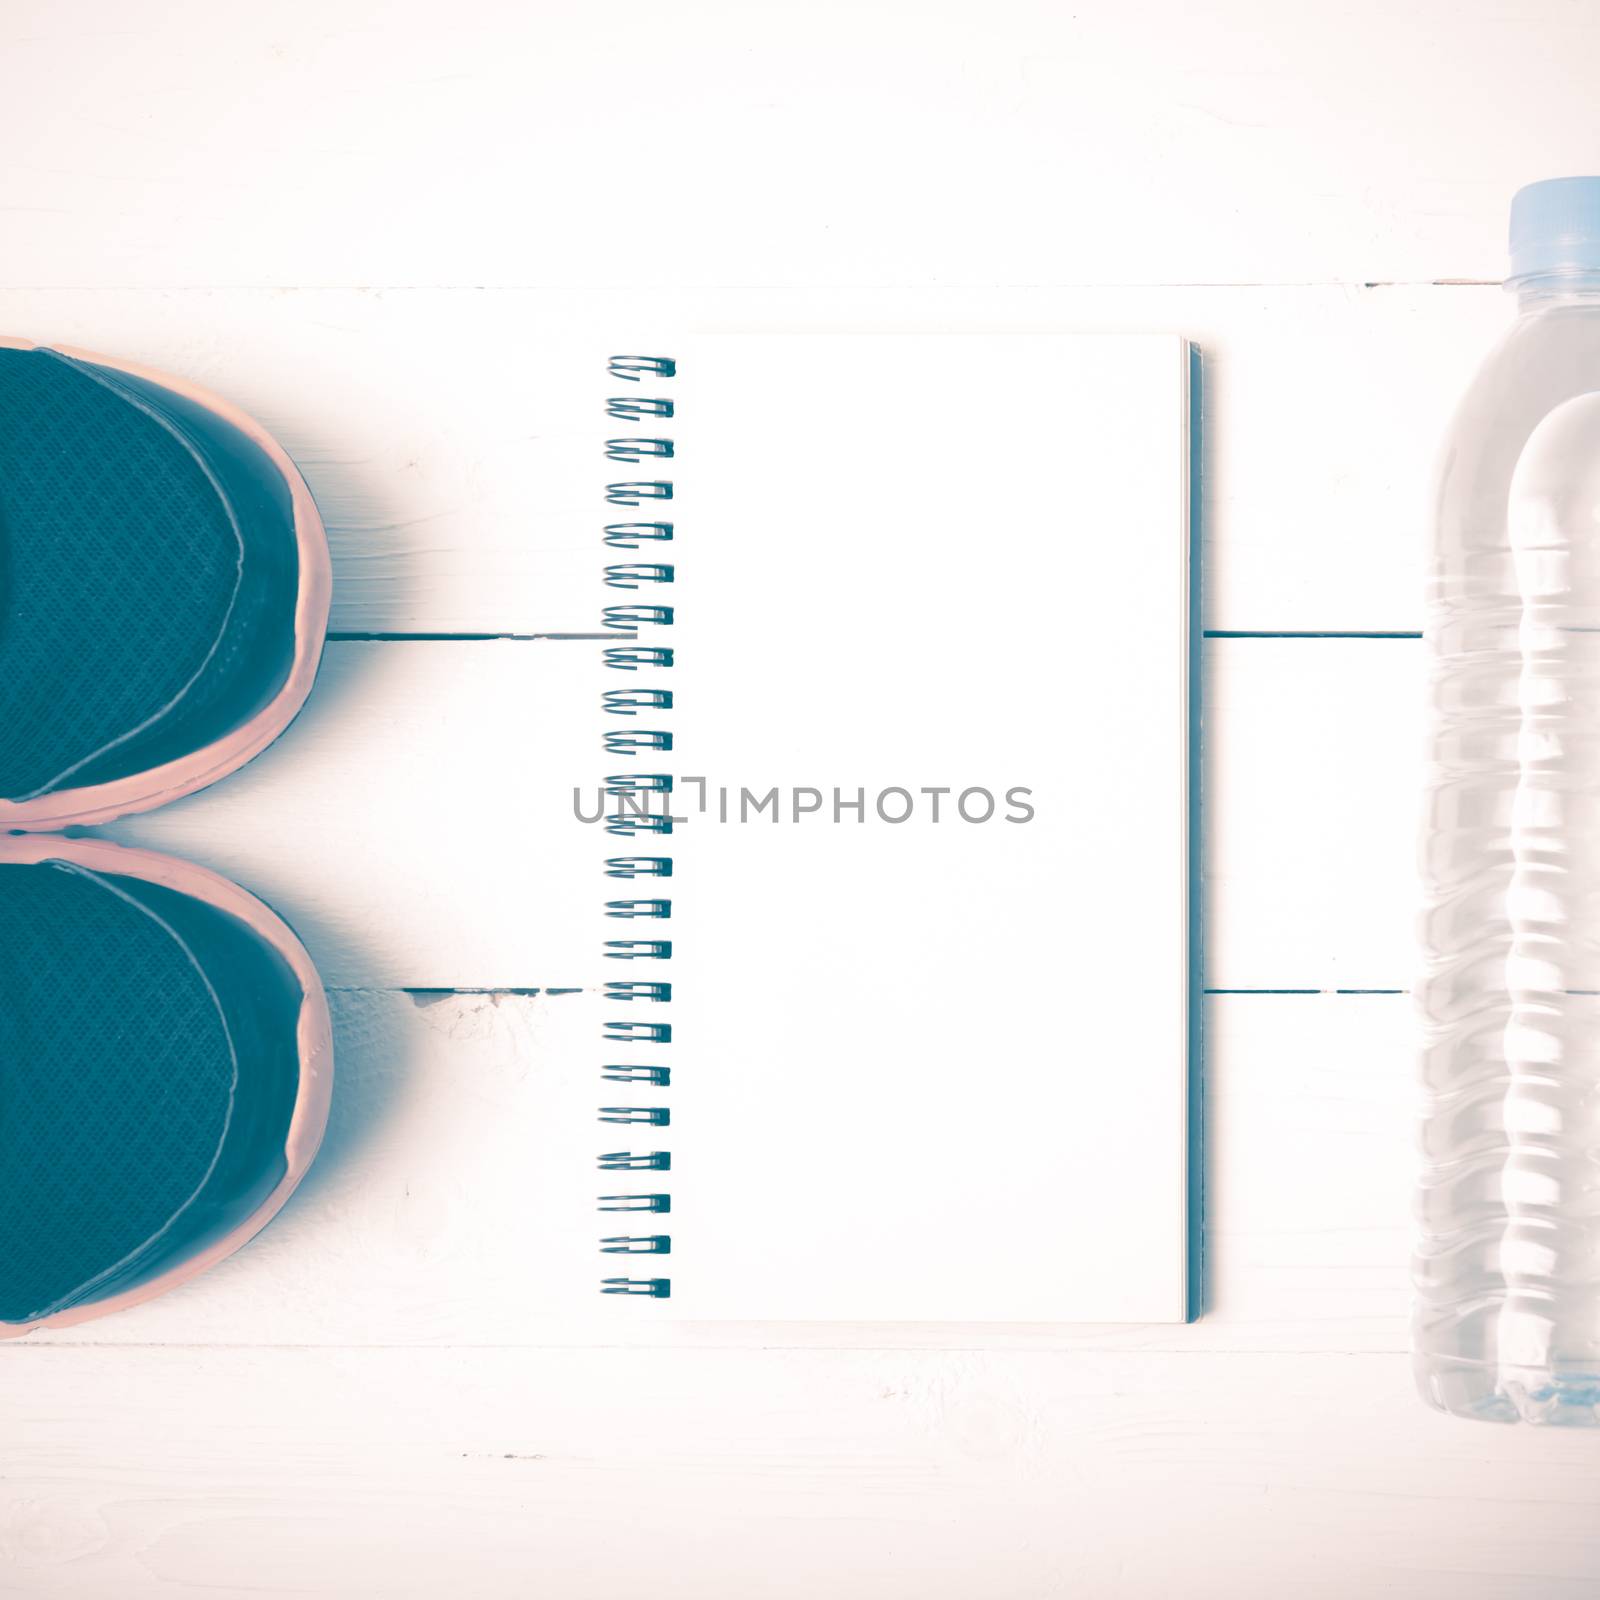 fitness equipment : running shoes,drinking water and notebook on white wood table vintage style